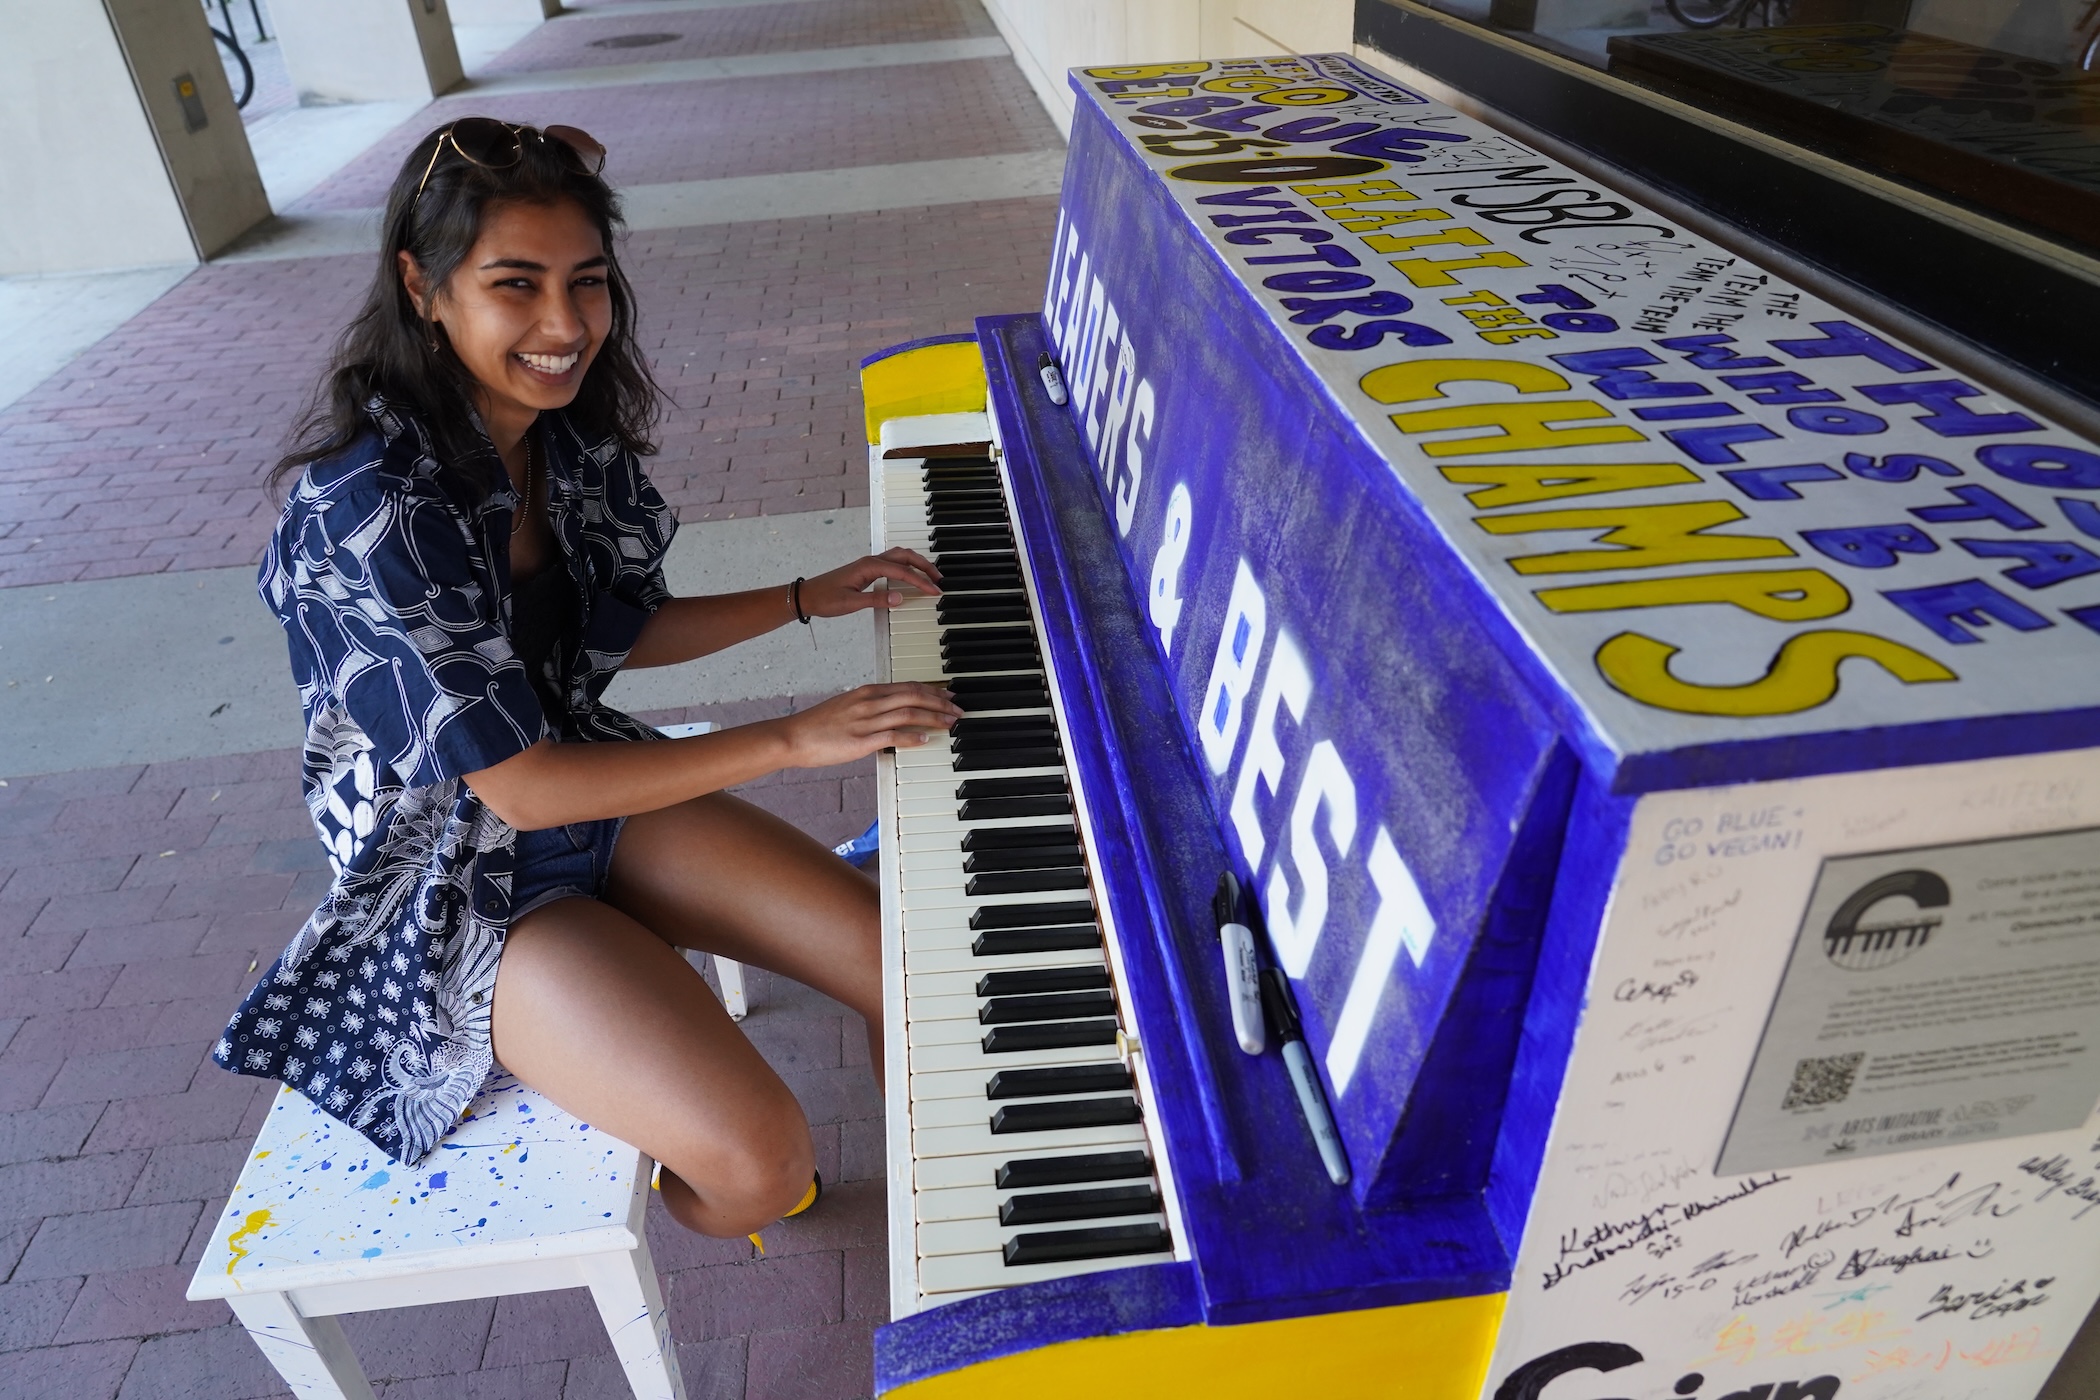 Navya Singhai grins as she plays the piano she helped paint.